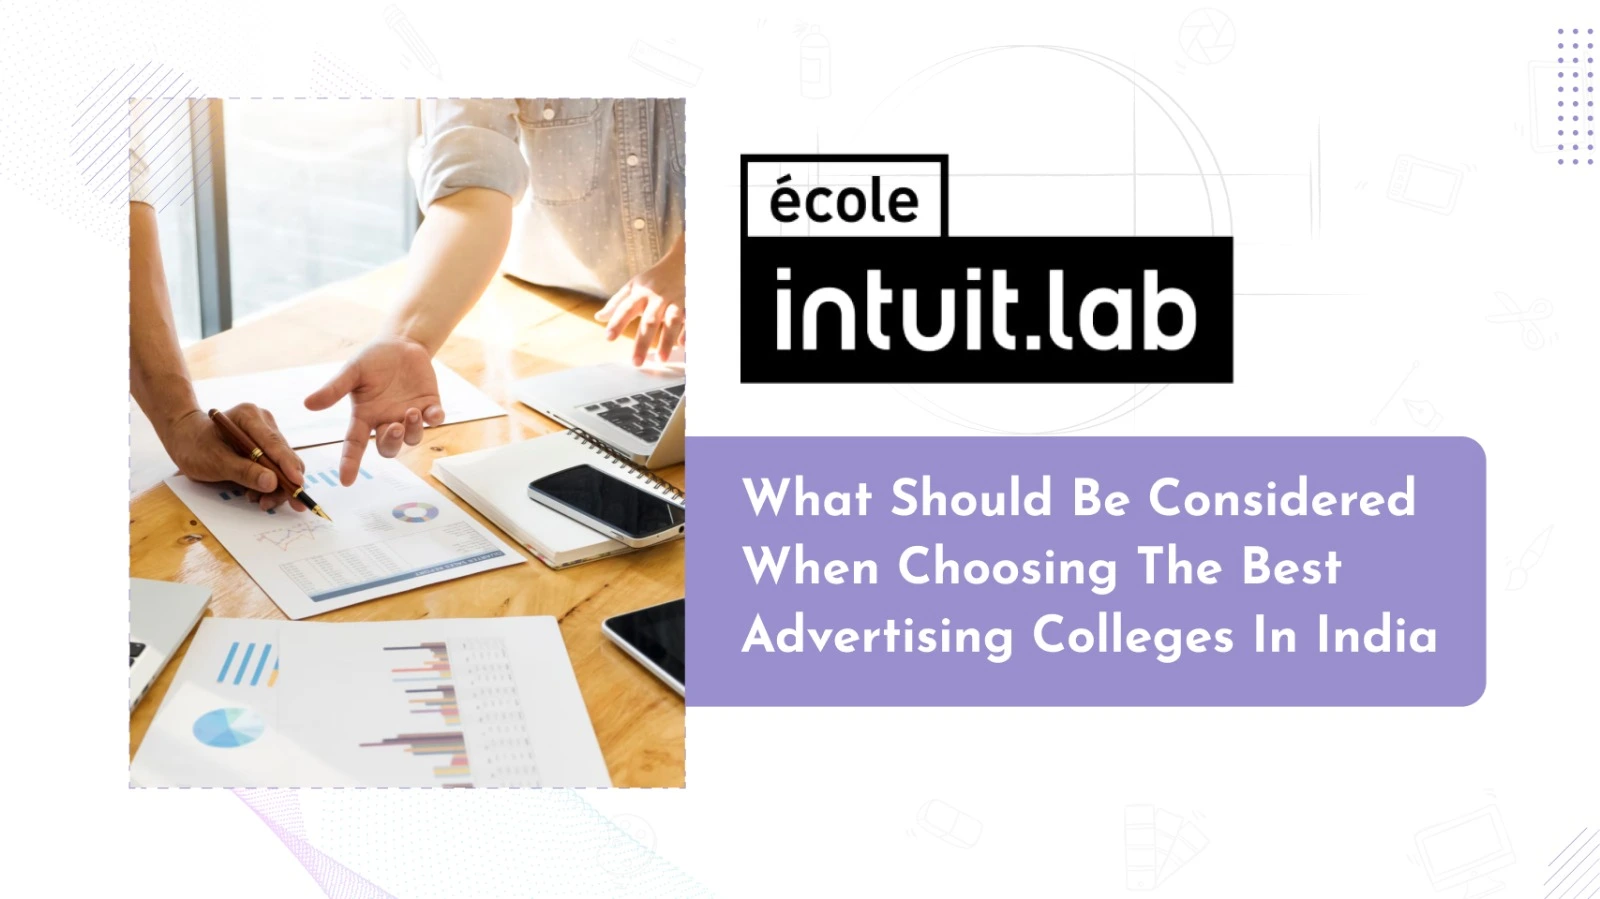 What Should Be Considered When Choosing The Best Advertising Colleges in India?